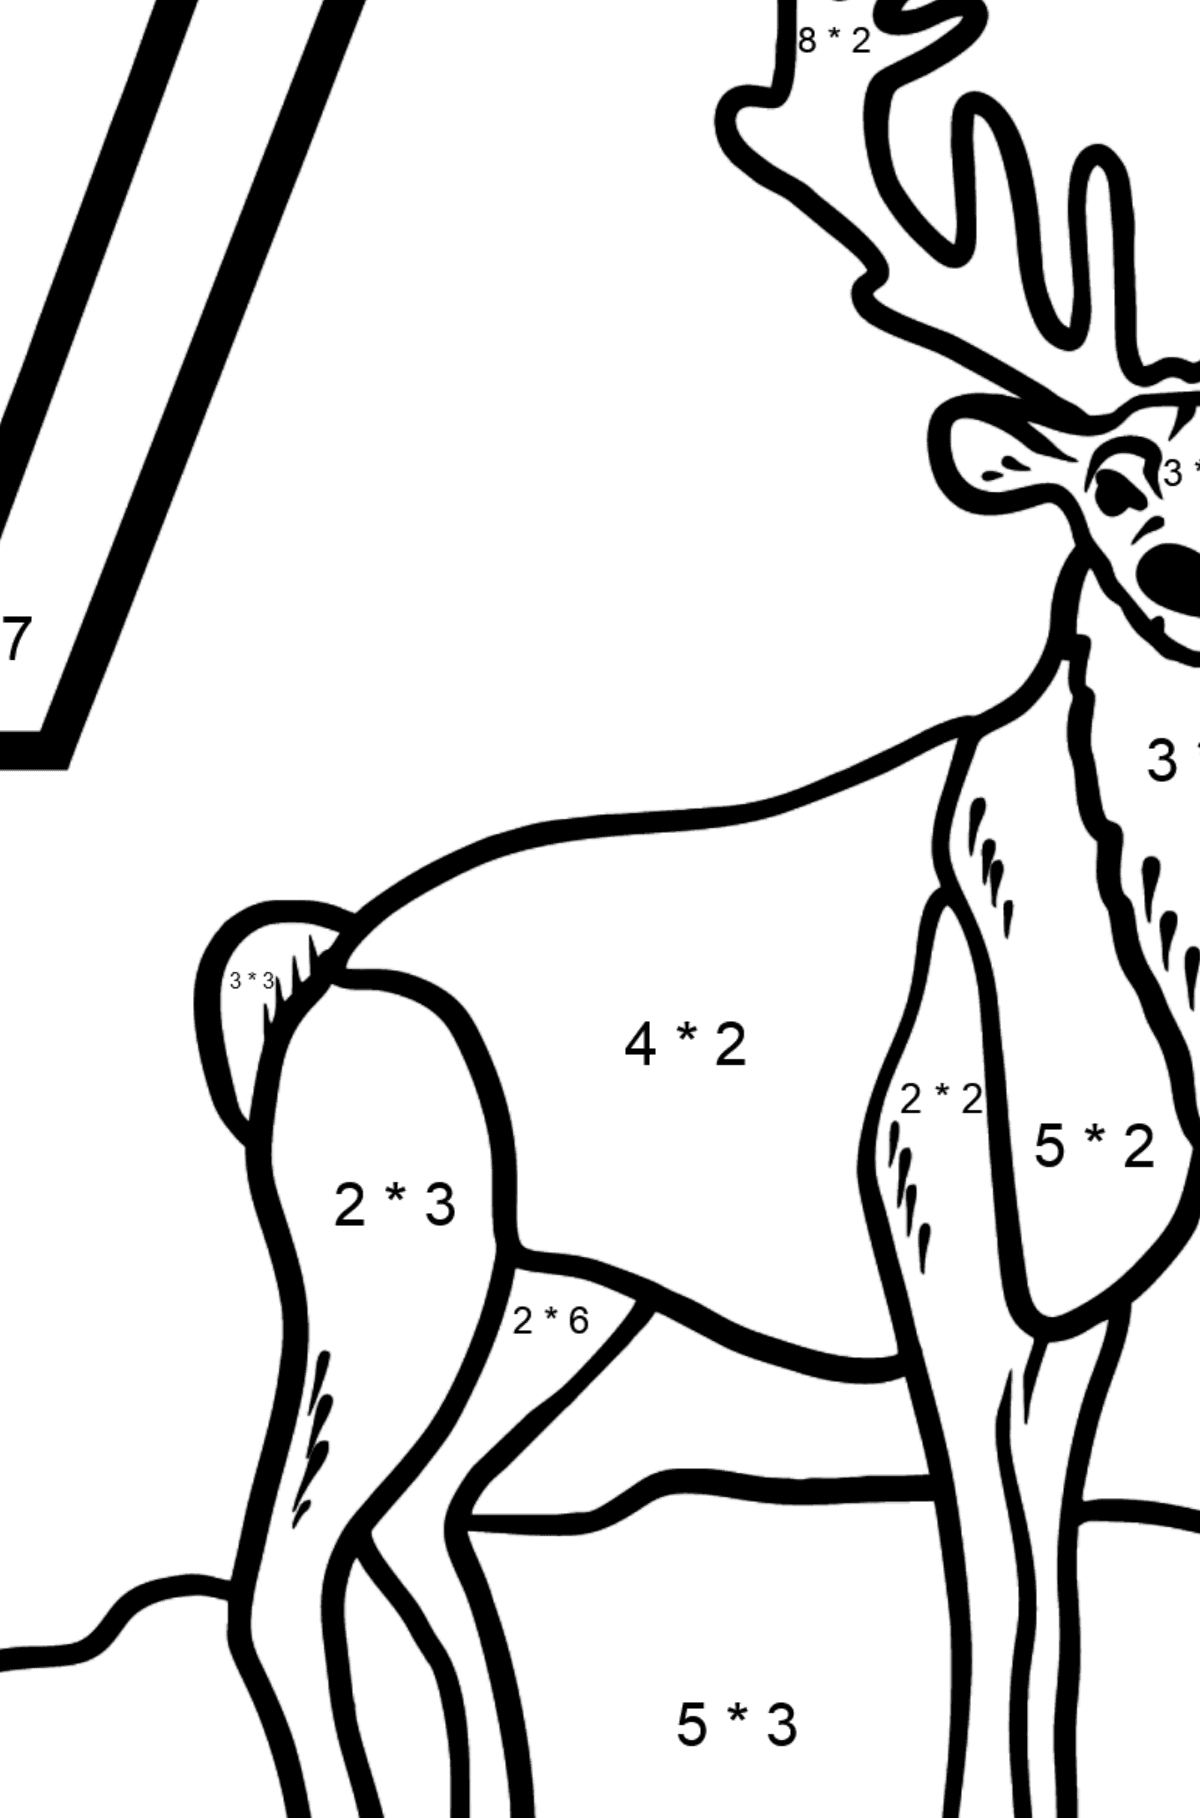 Portuguese Letter V coloring pages - VEADO - Math Coloring - Multiplication for Kids